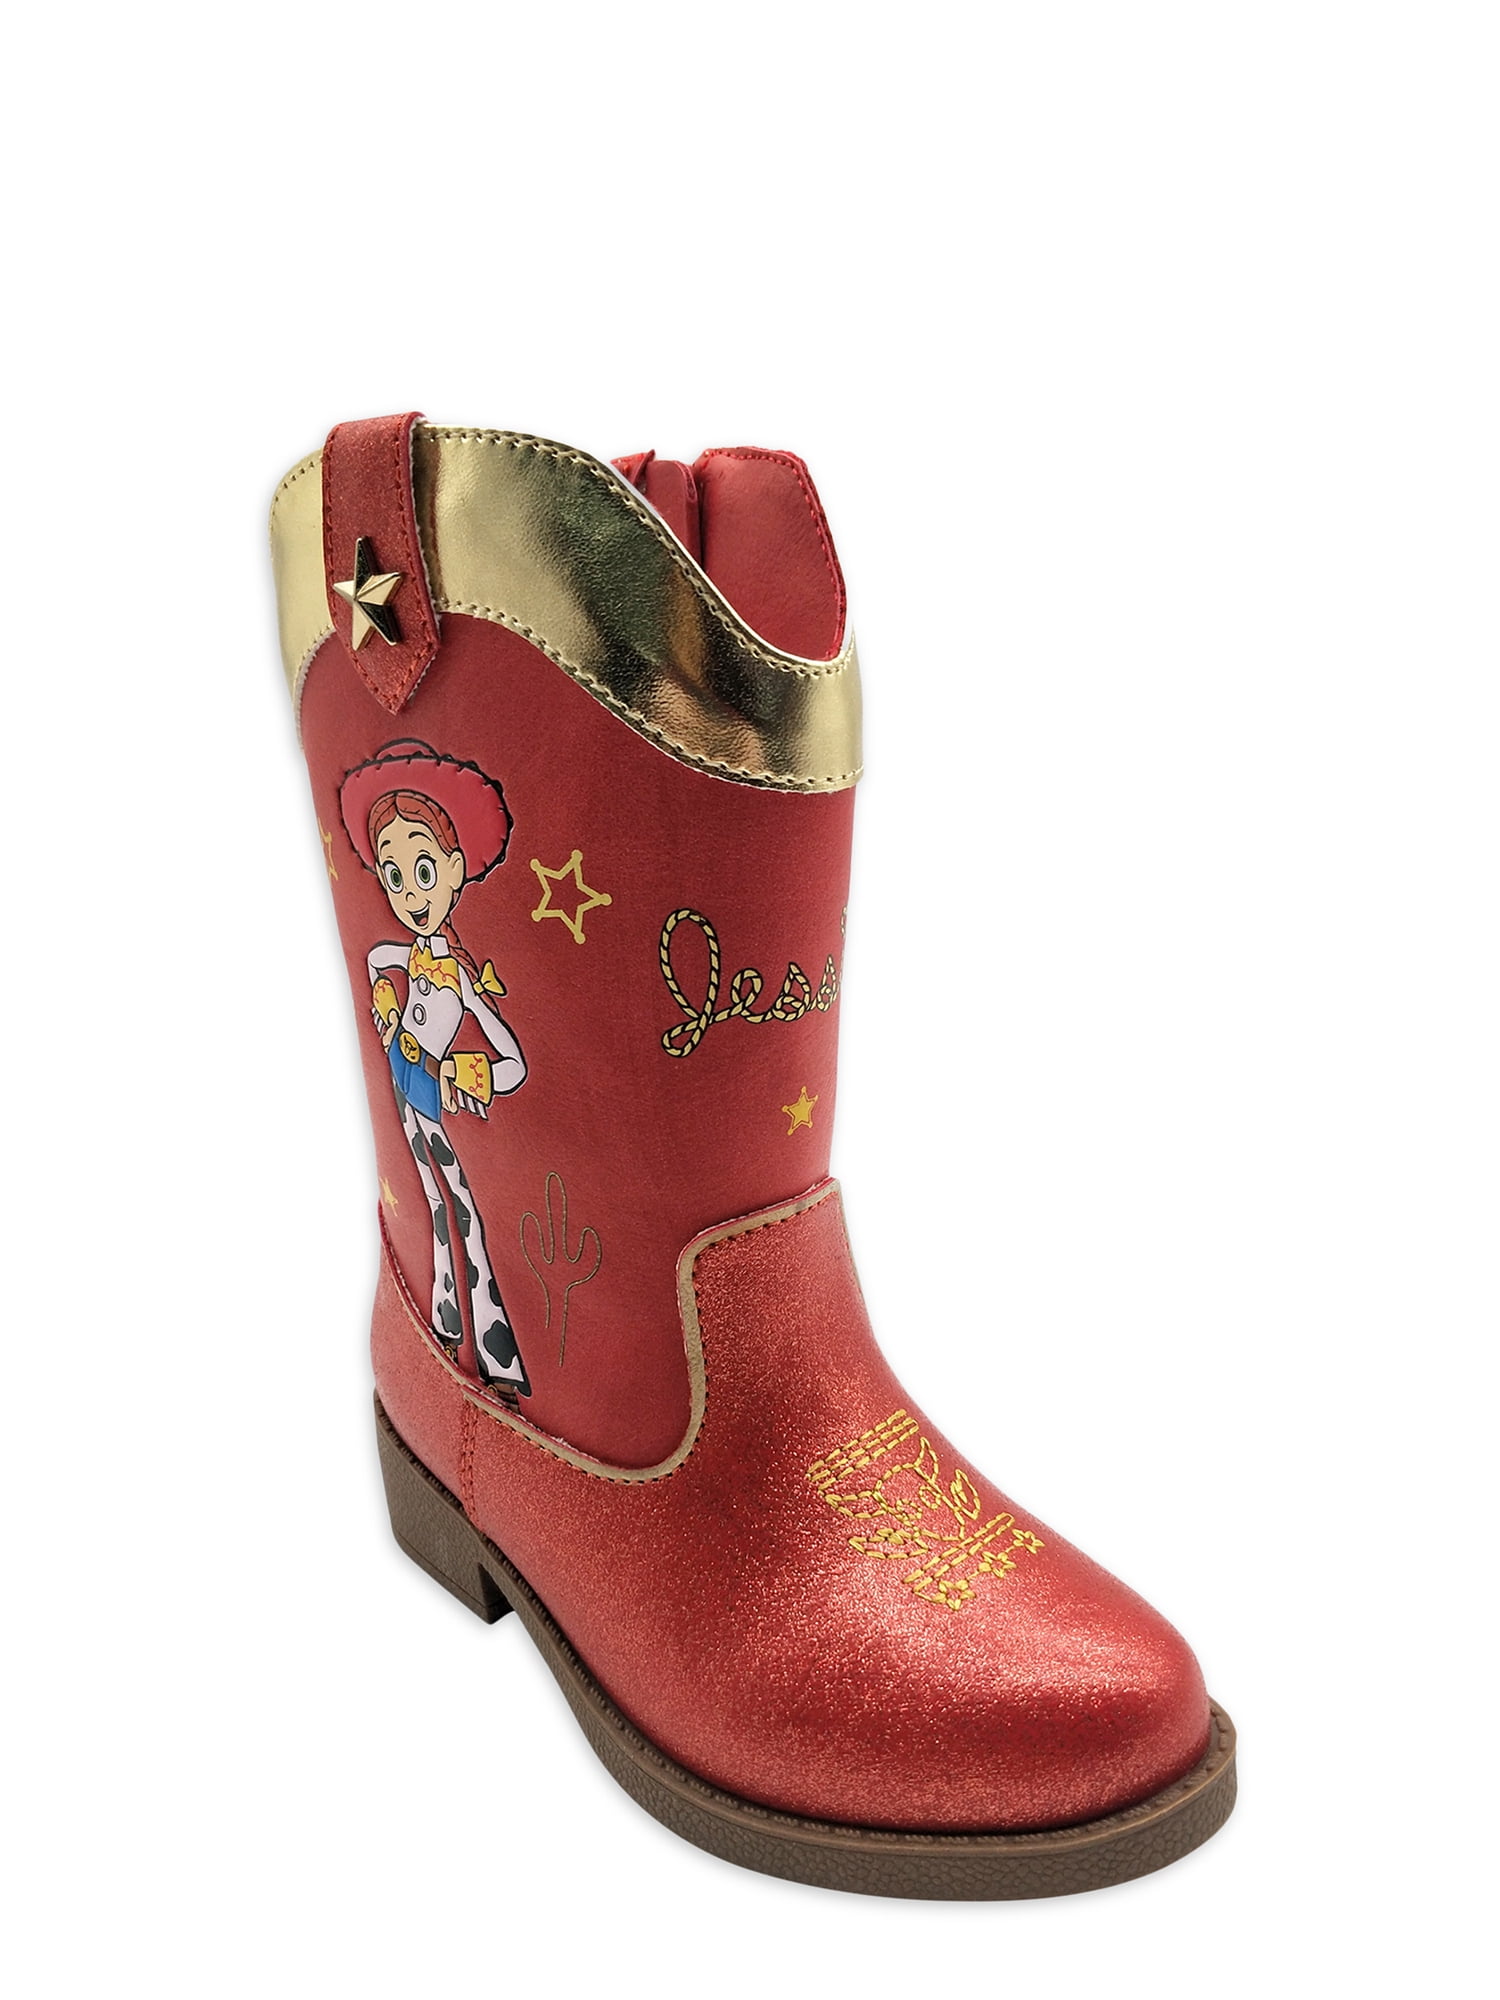 Shopping >toy story jessie cowboy boots big sale - OFF 64%